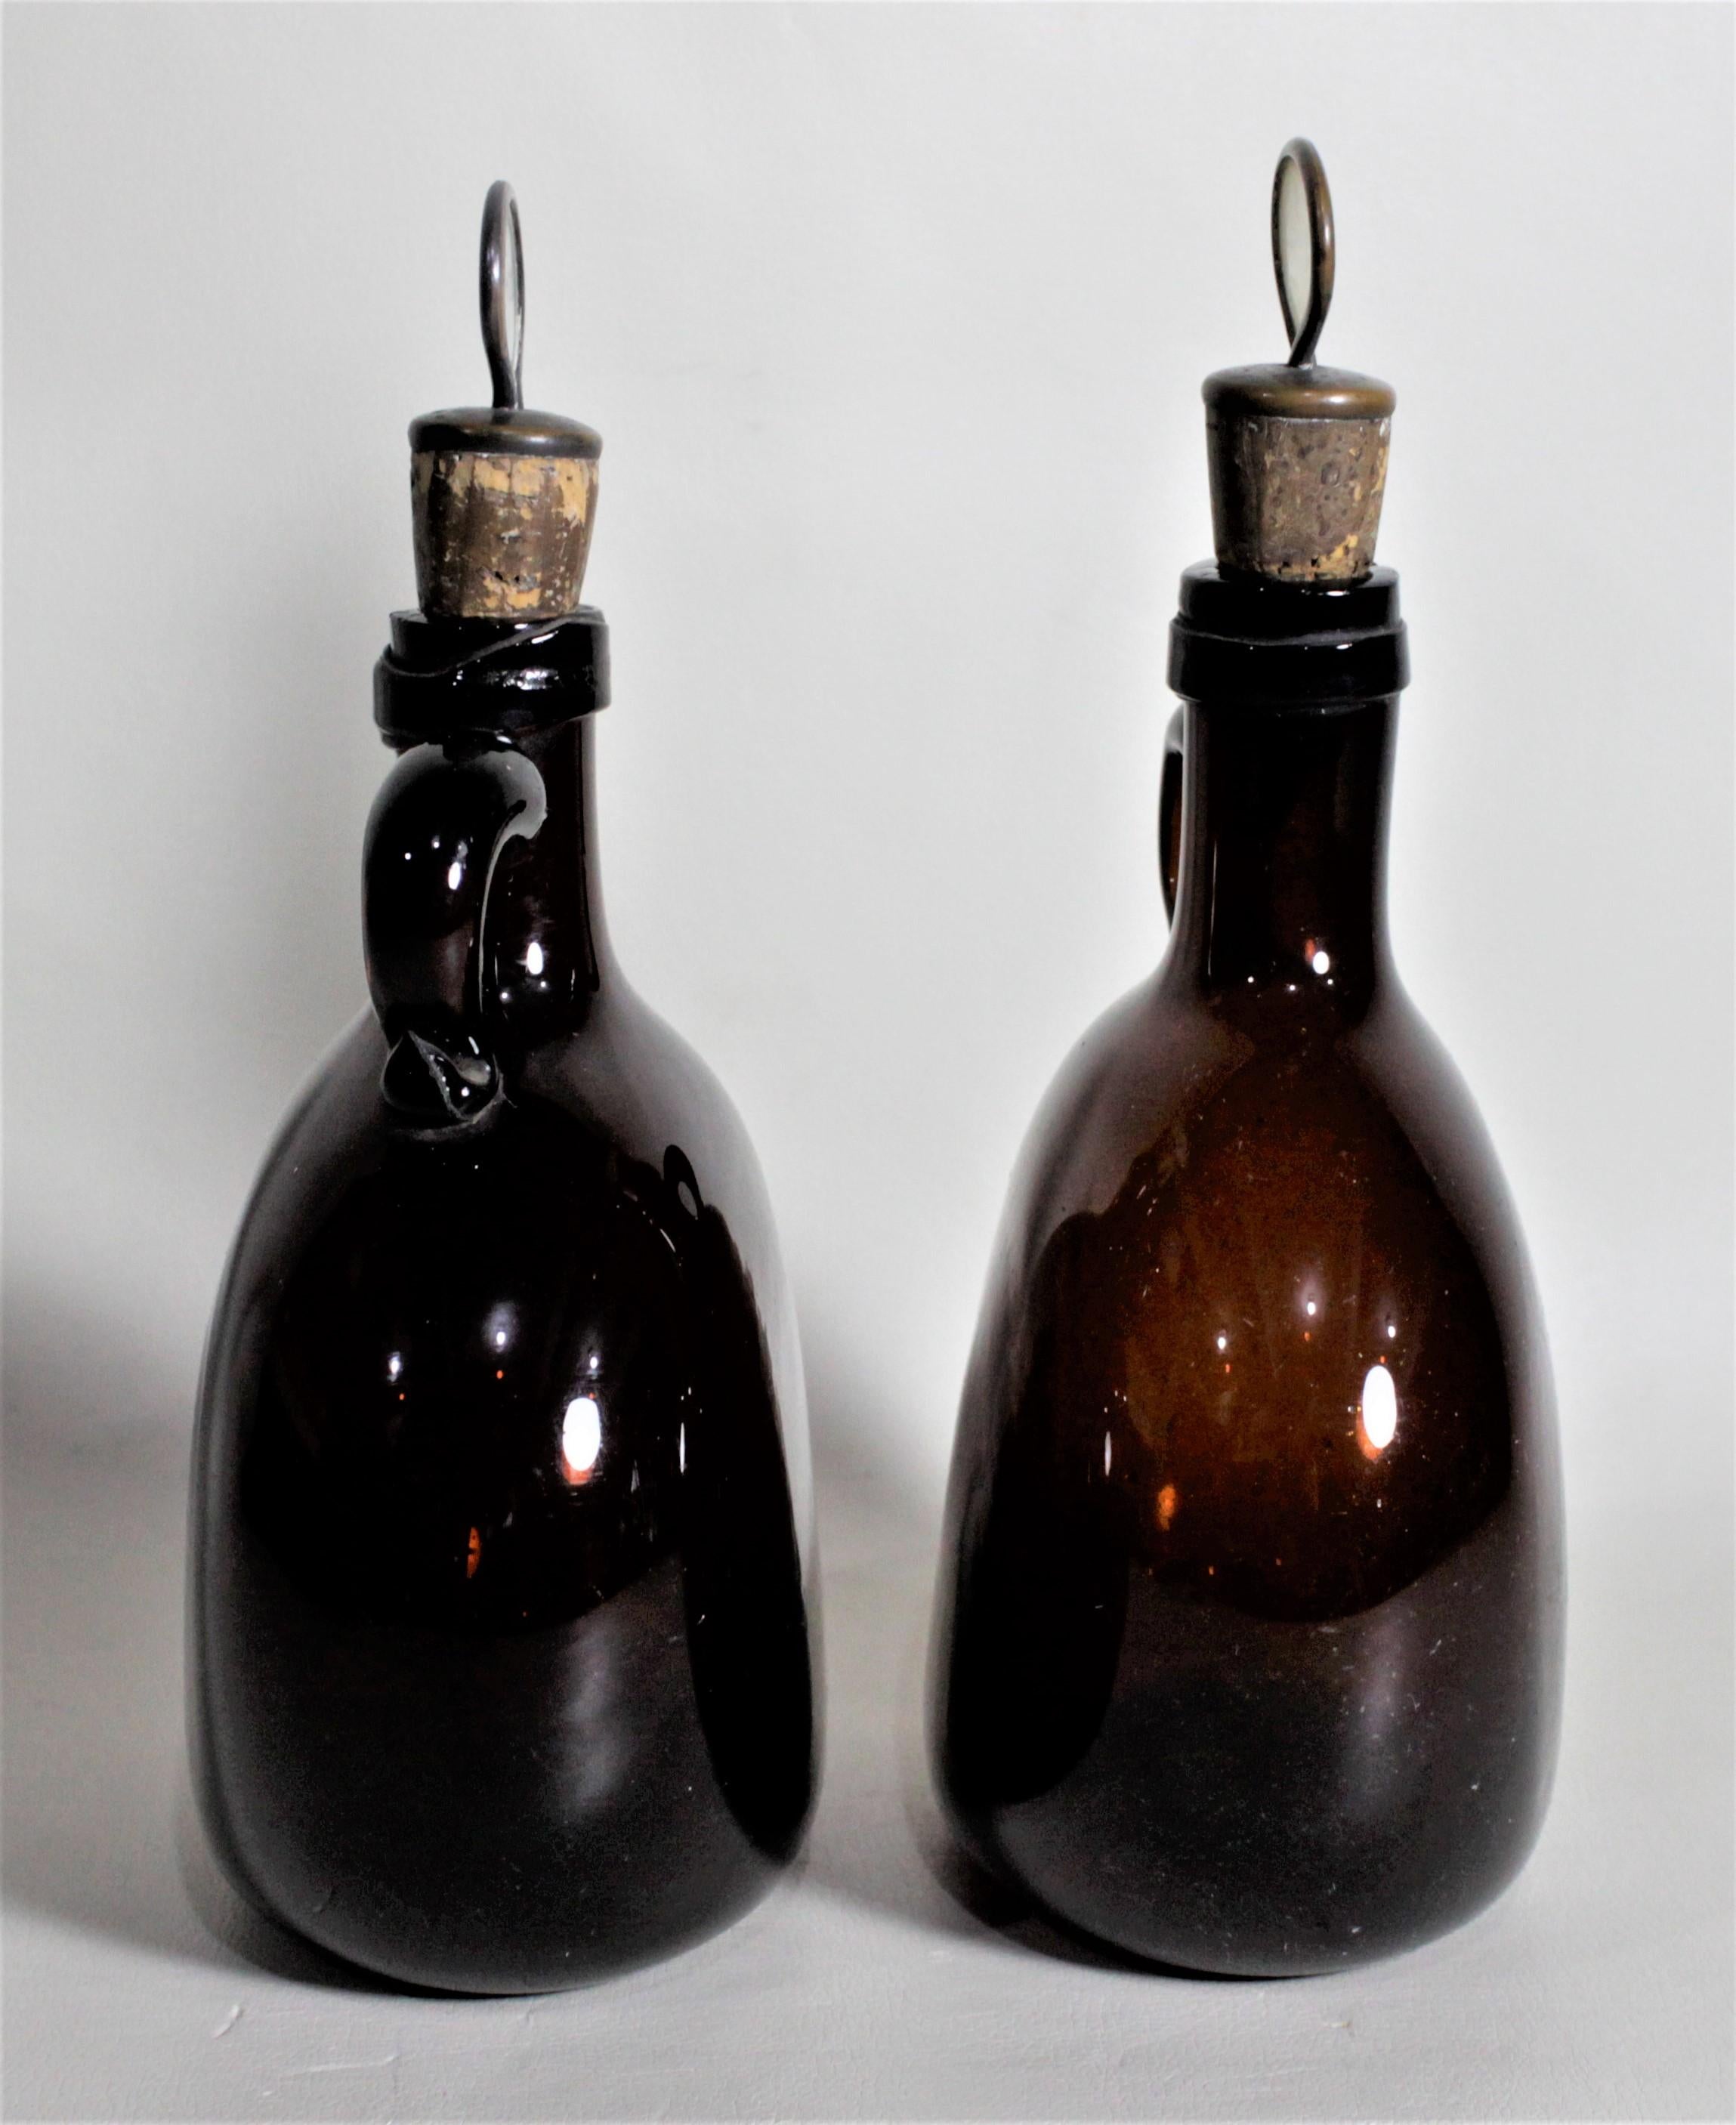 This pair of antique amber blown glass bottle flasks, or decanters were made in circa 1870 in the period Victorian style and originate from England. These decanters are hand formed, so not perfectly identical and have swirled finger handles and a